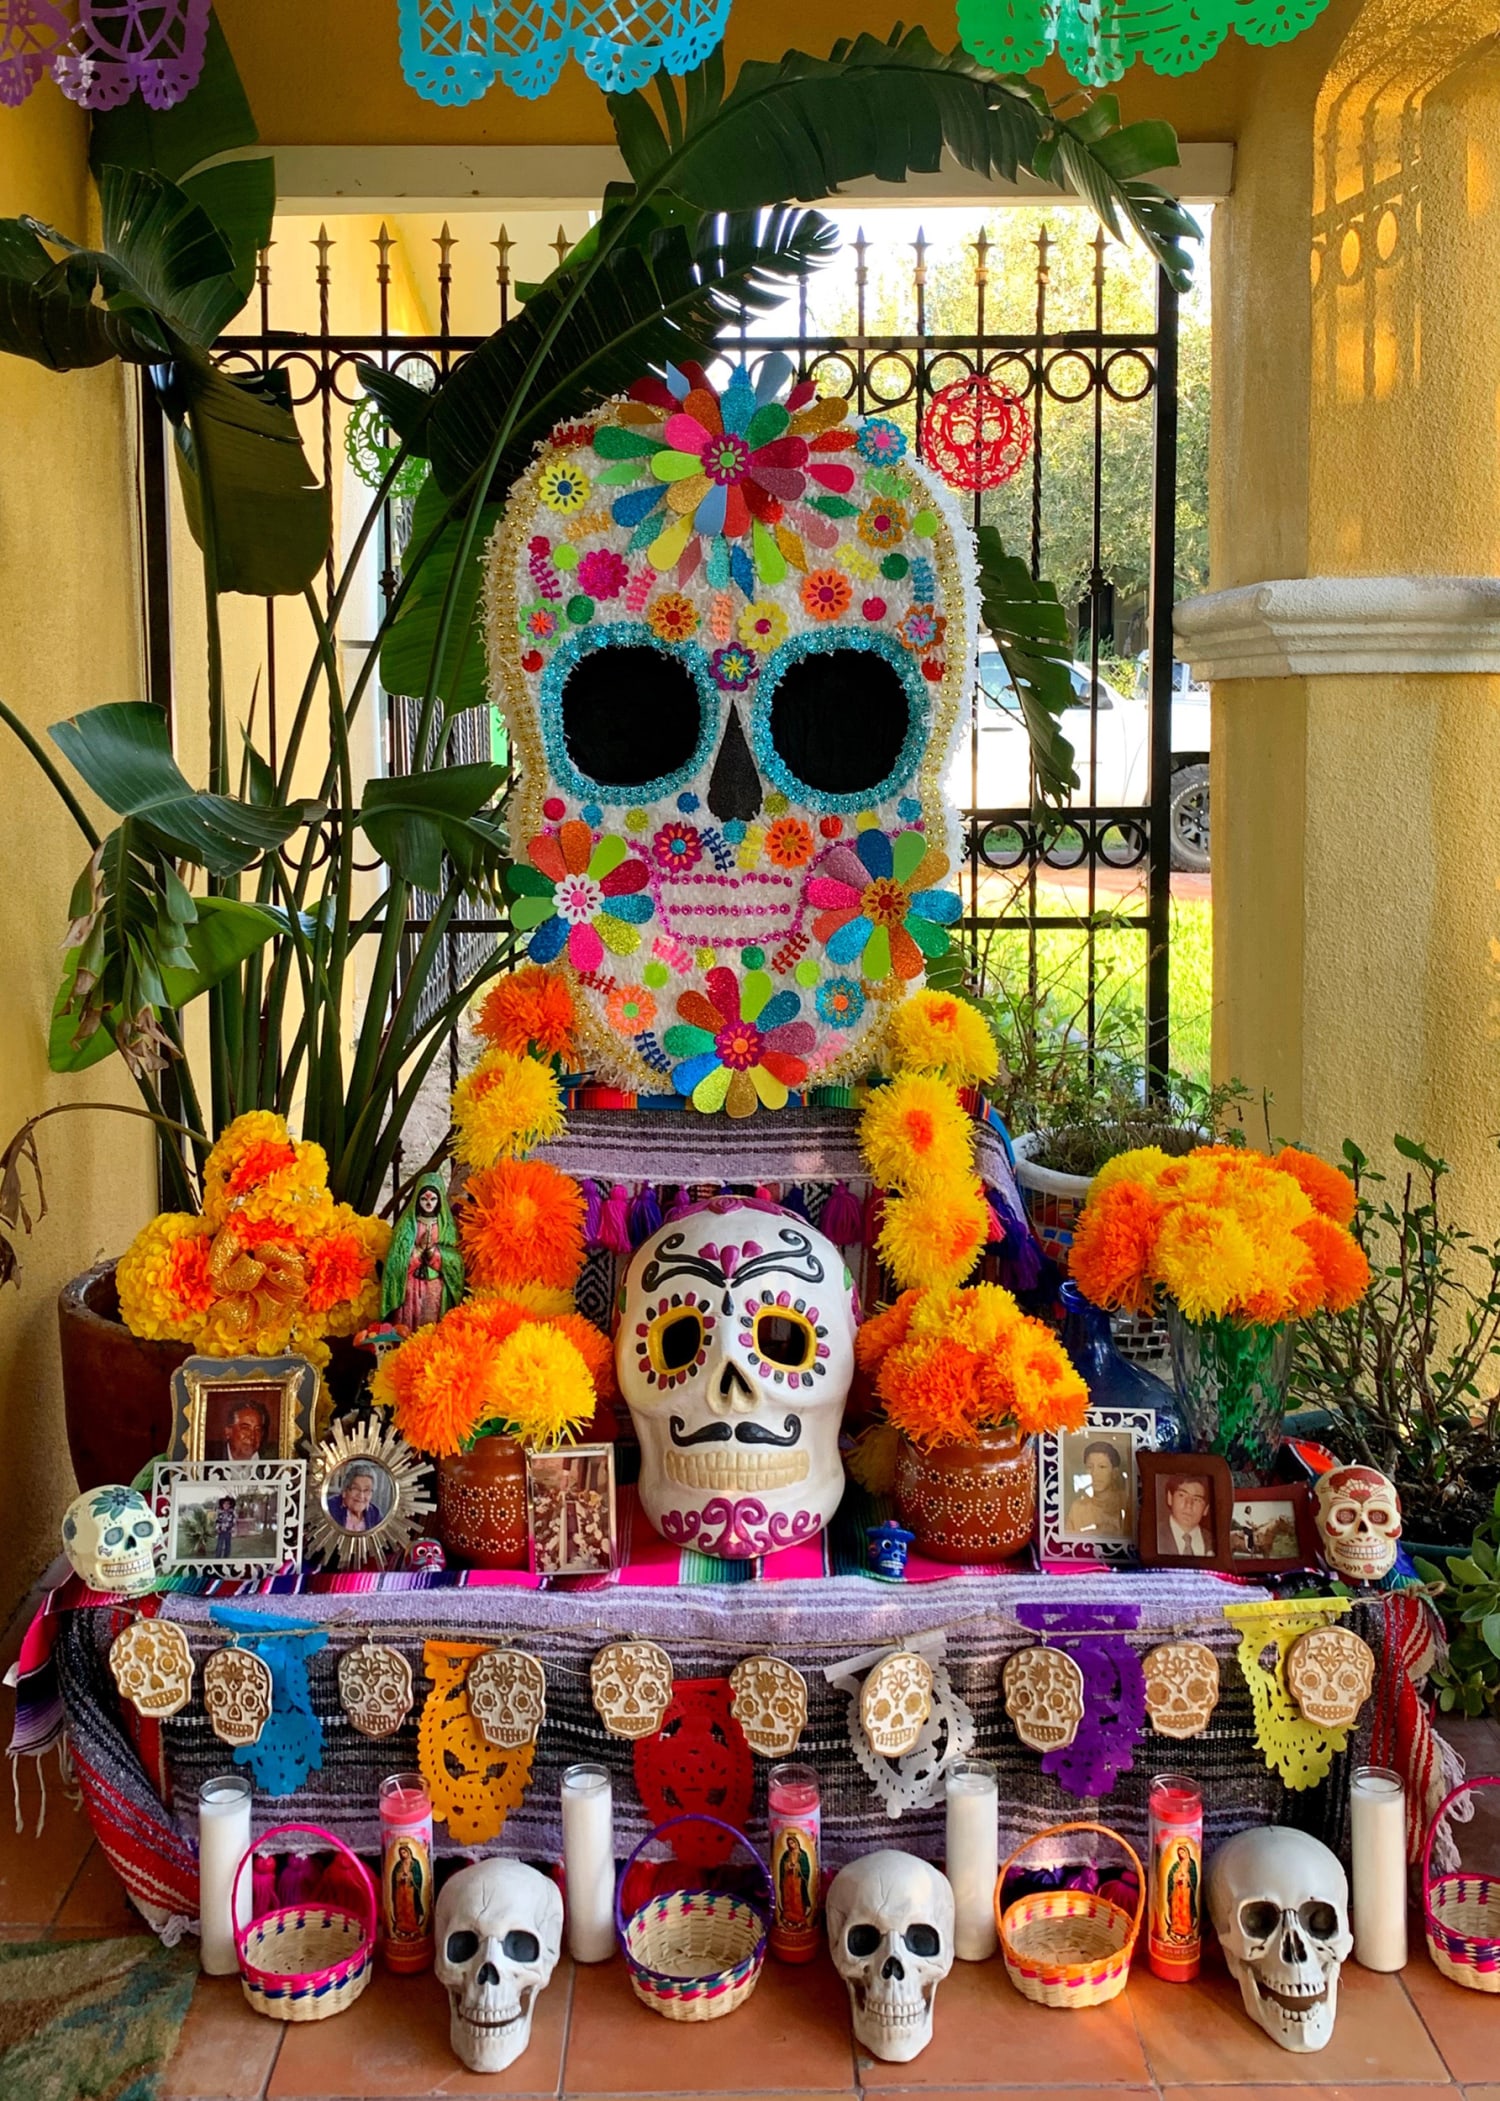 On Día de los Muertos, Latino families honor relatives who died from  Covid-19